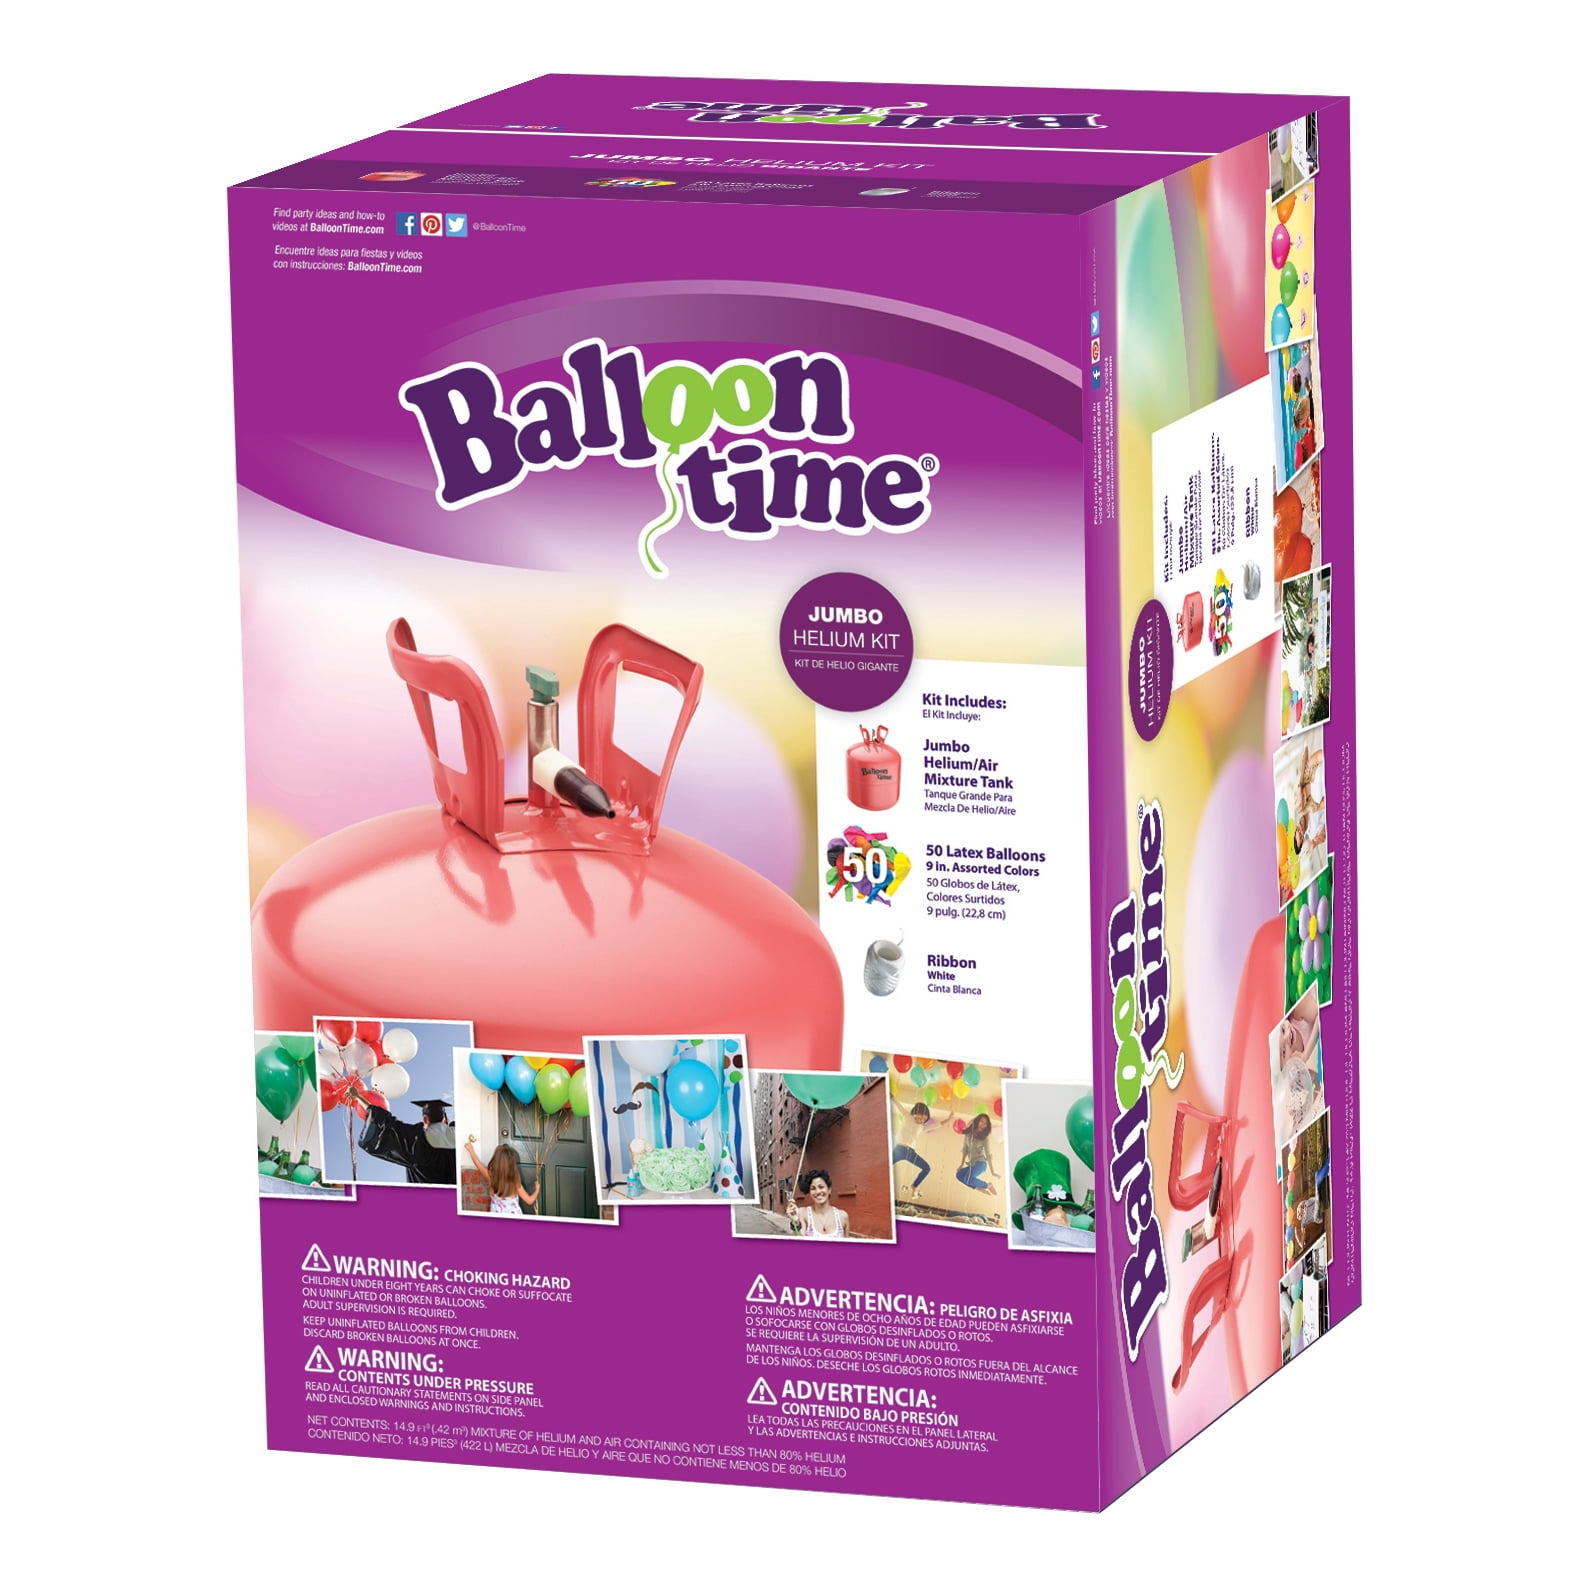 Party Favors Supplies Large Helium Tank